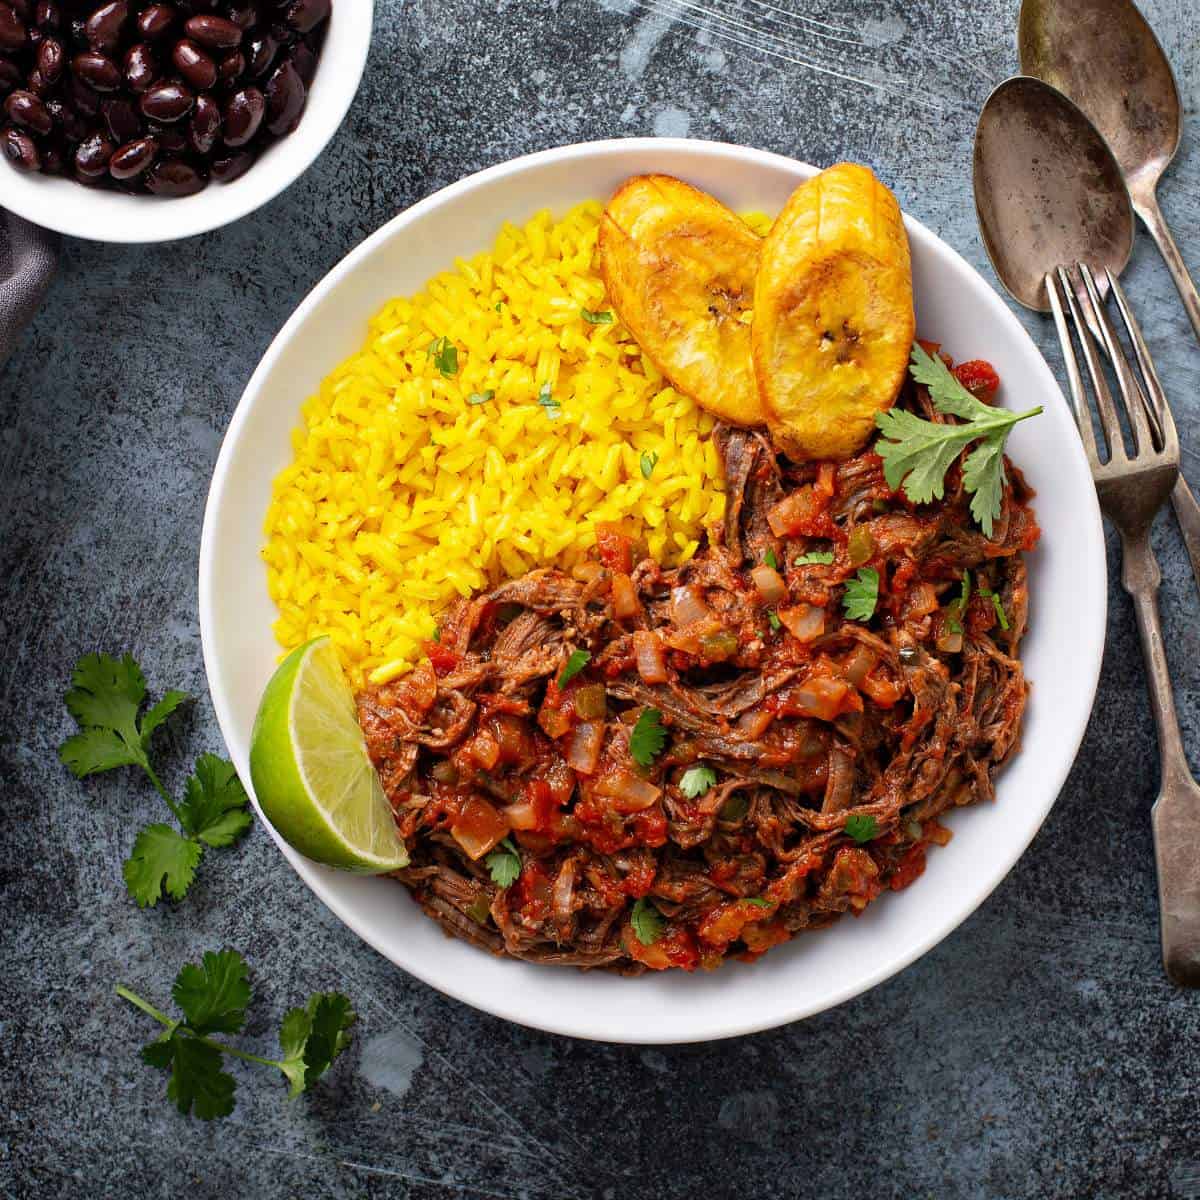 The best Cuban foods are incomplete without a bowl of rice and beans, served alongside a fork and spoon.